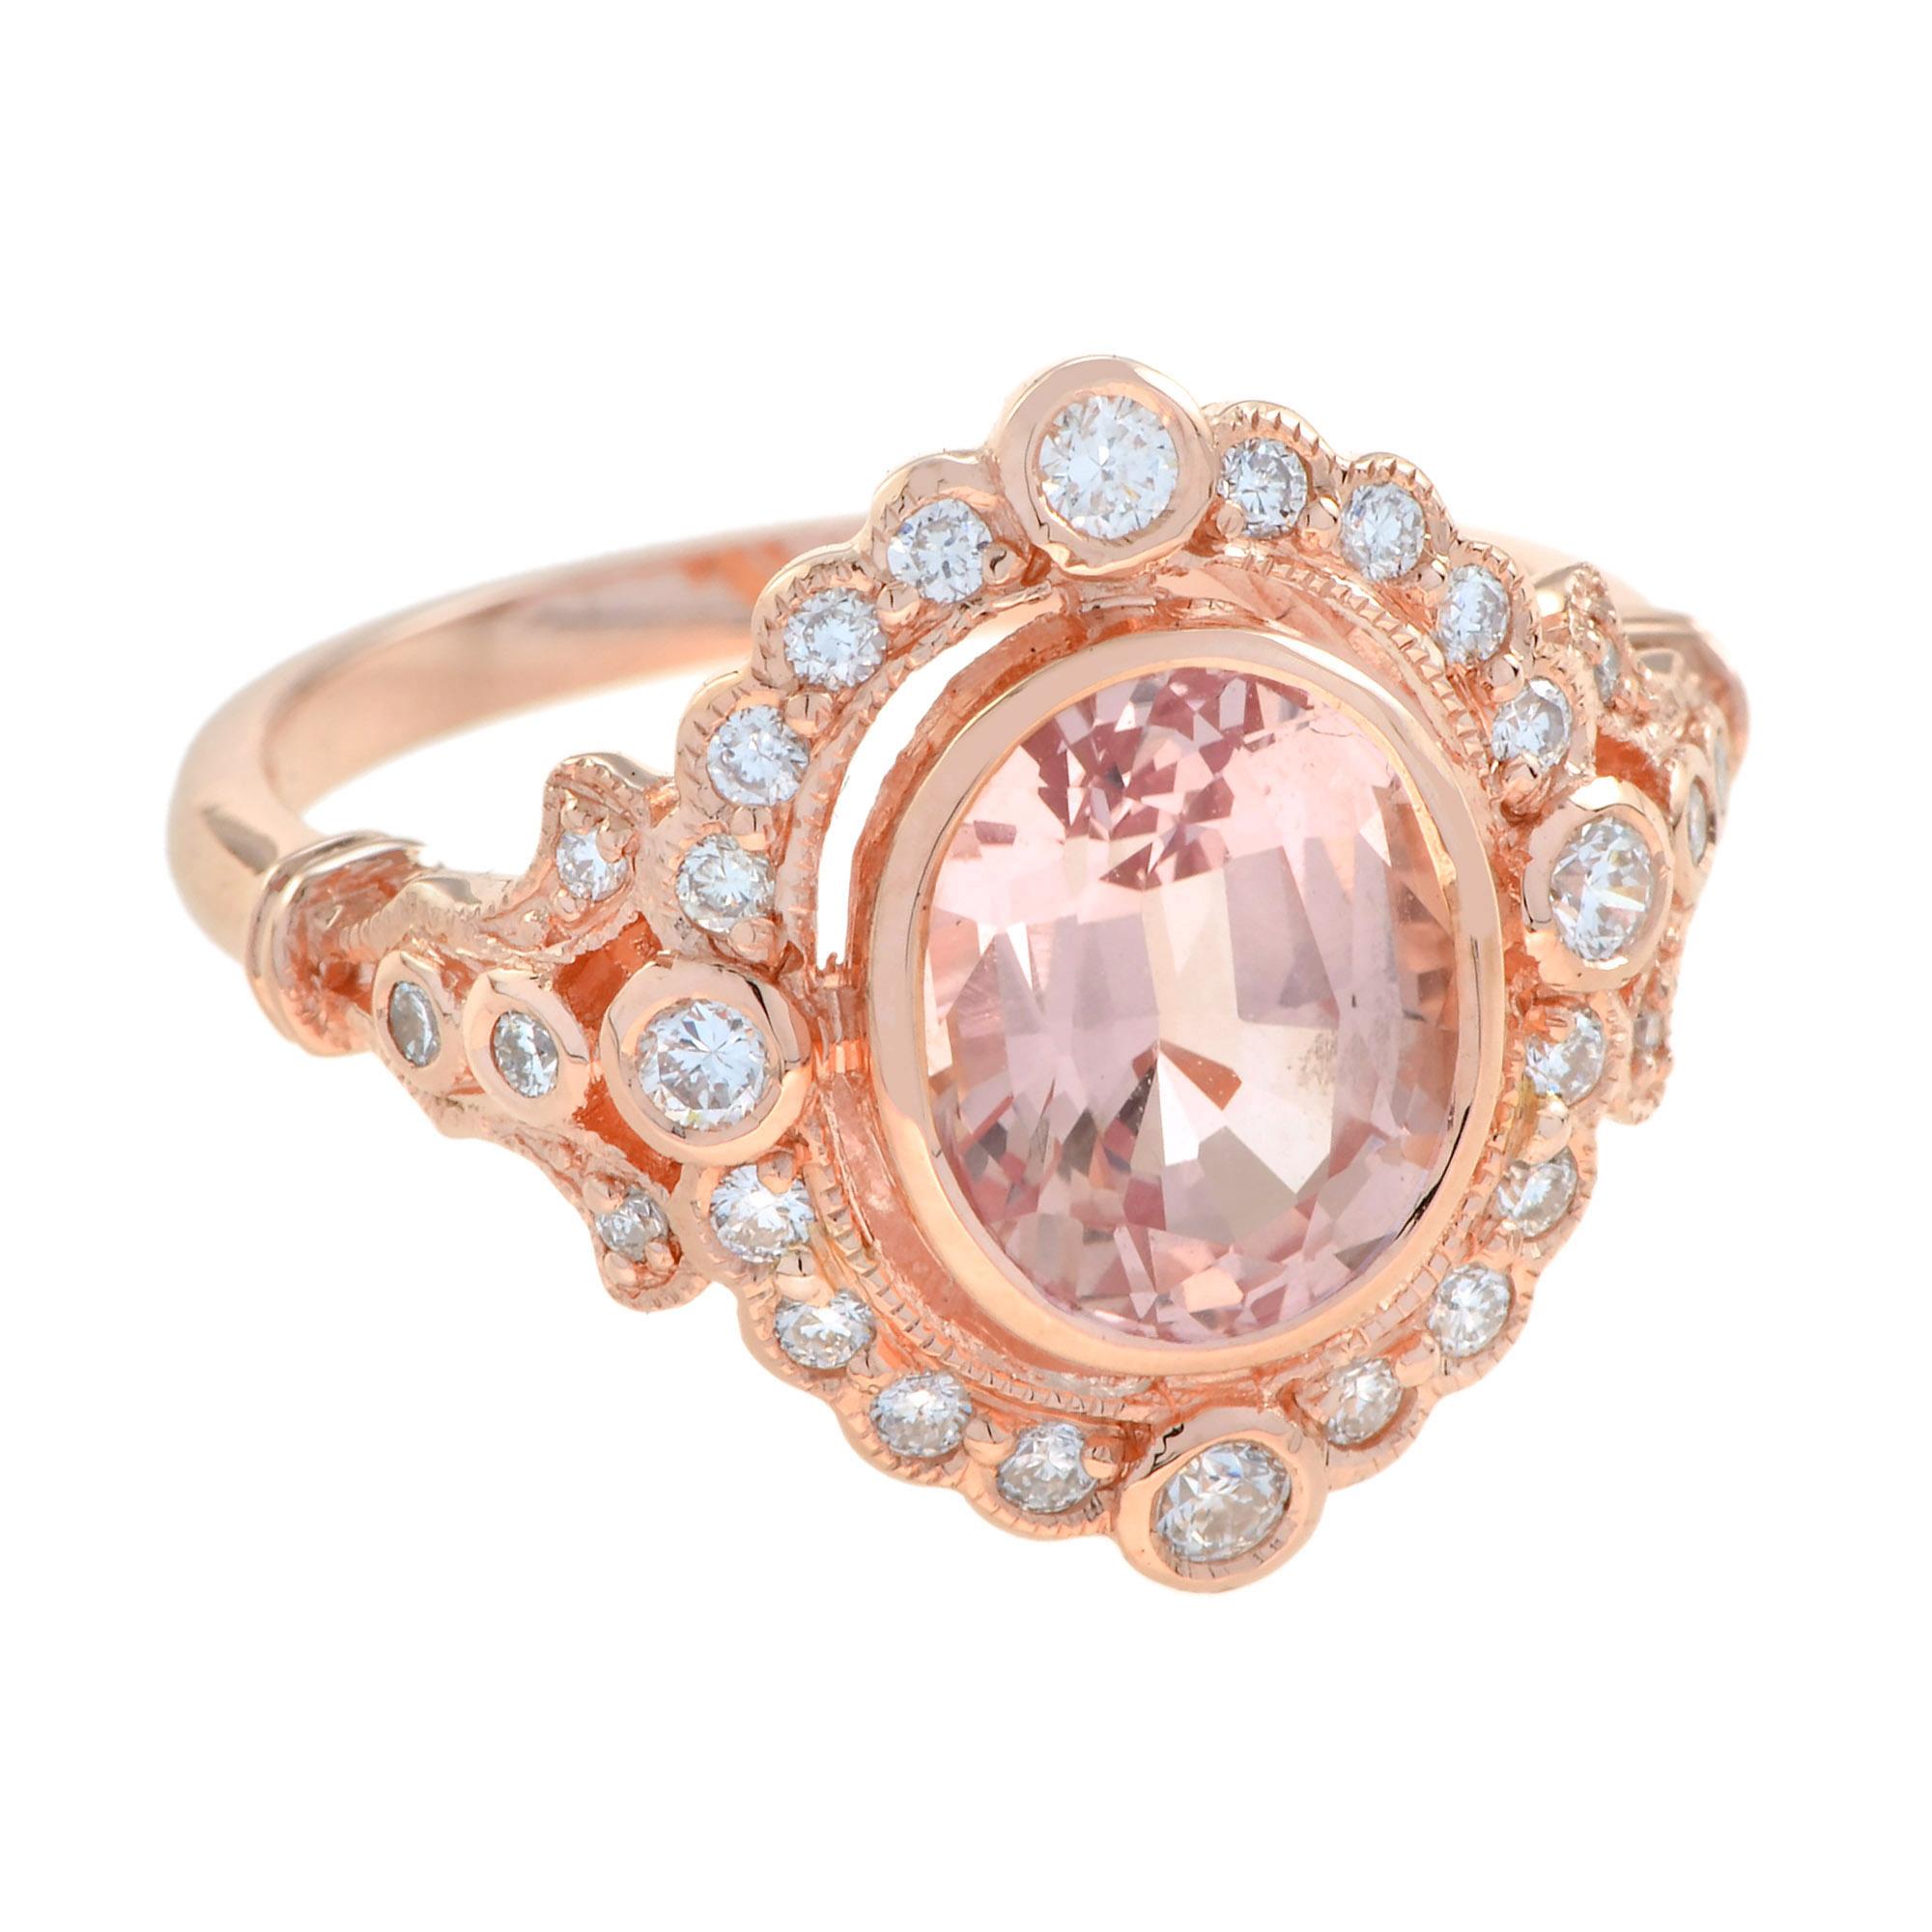 For Sale:  2.50 Ct. Morganite Diamond Vintage Style Halo Engagement Ring in 18K Rose Gold 3